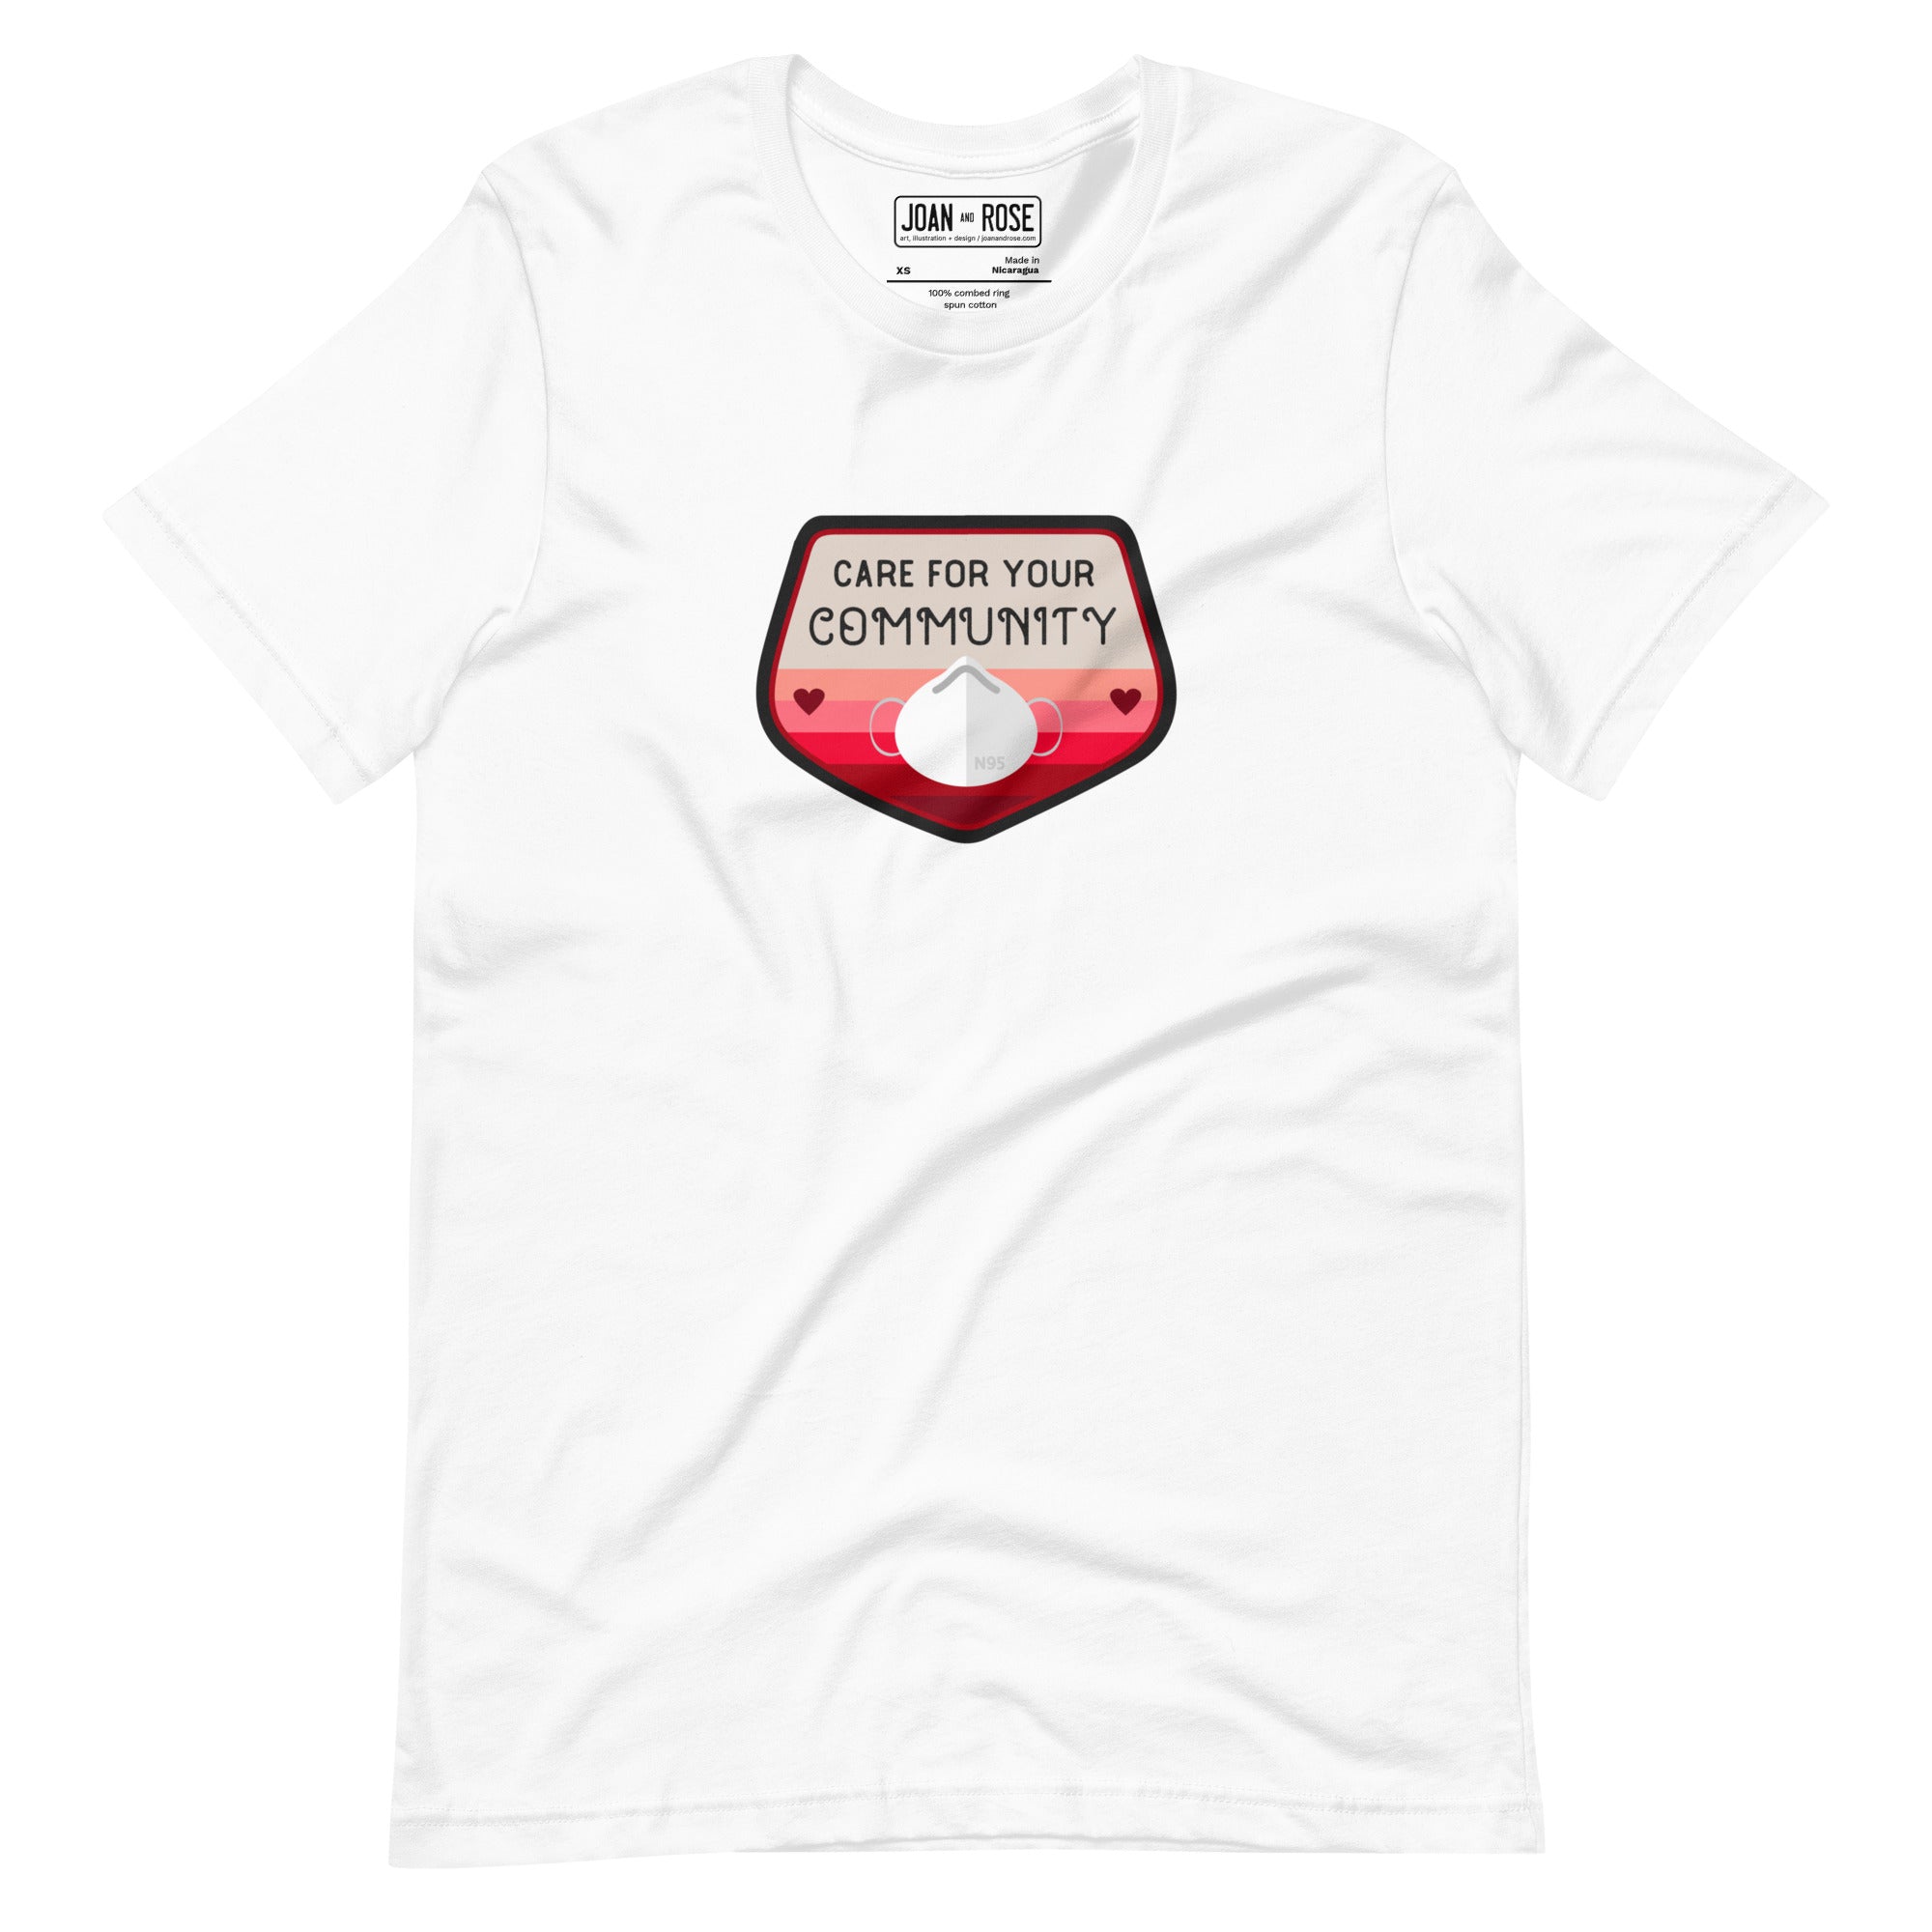 View of Care for your community t-shirt in white